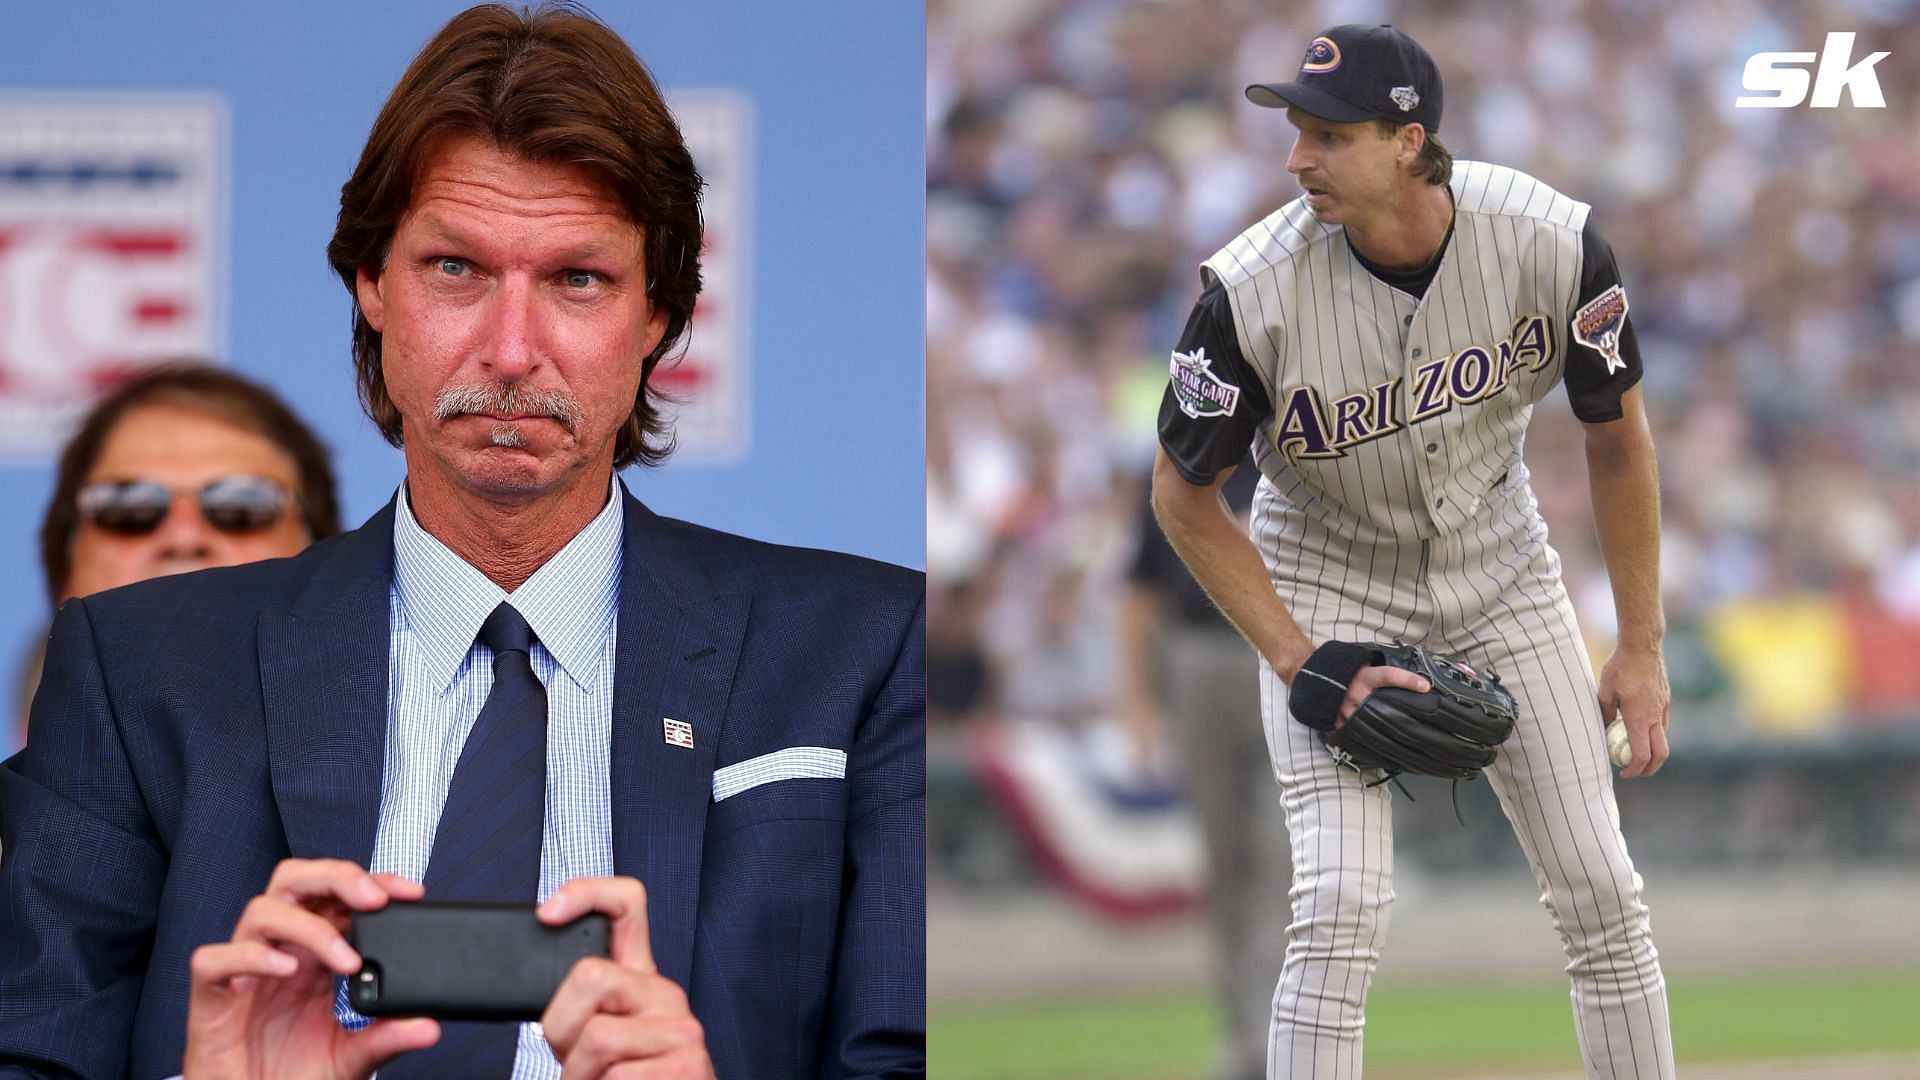 Hall of Fame pitcher Randy Johnson has embarked on a post-career journey as a photographer